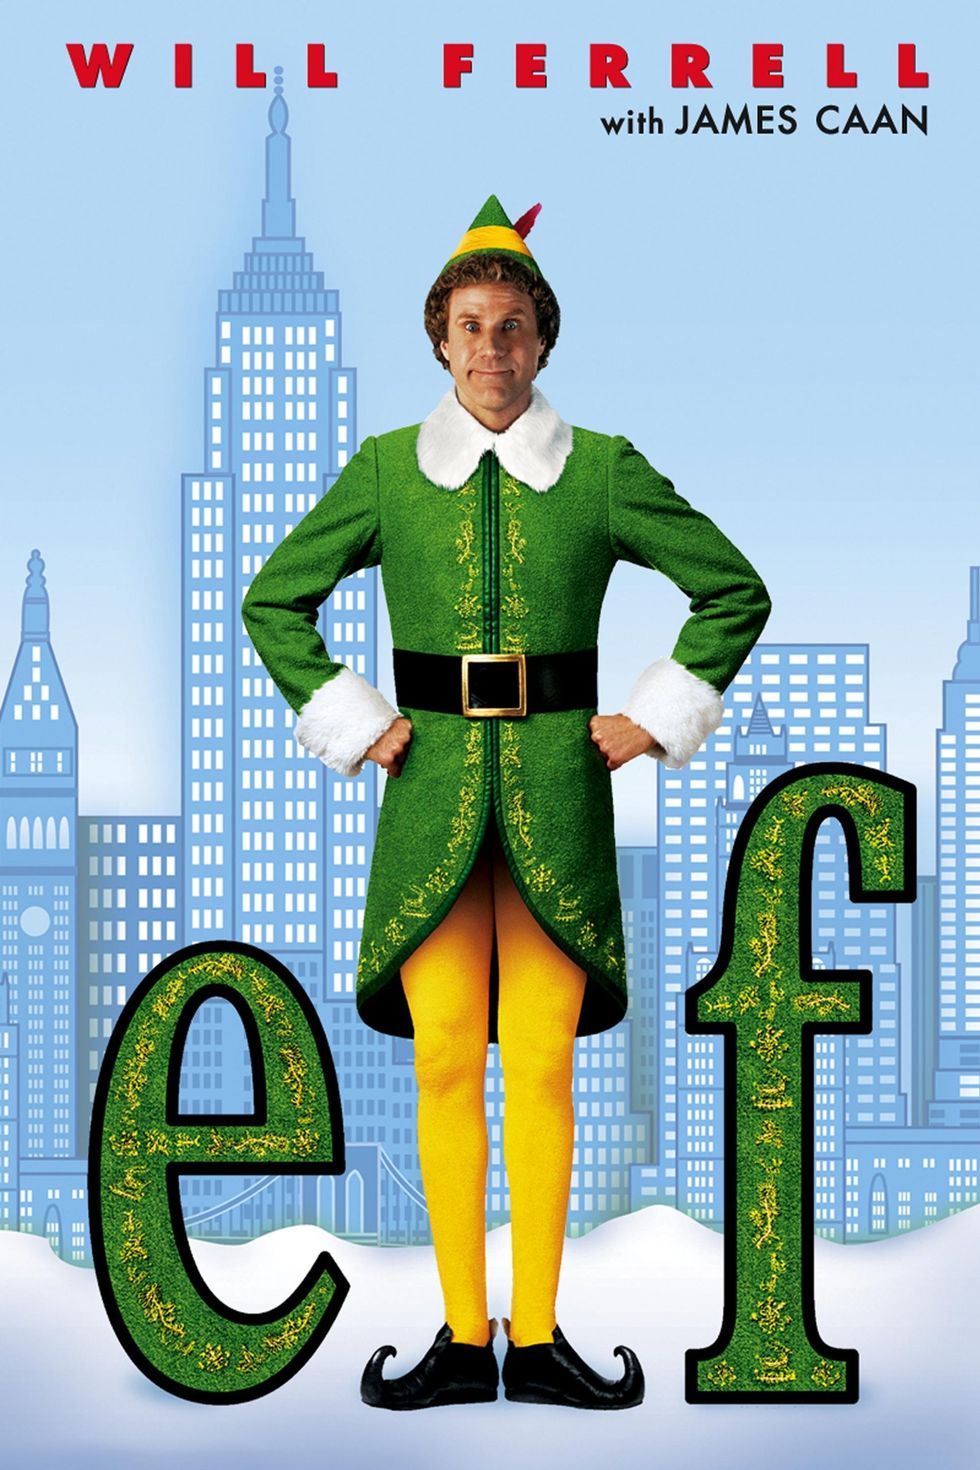 Best Christmas Movies for Kids - Elf